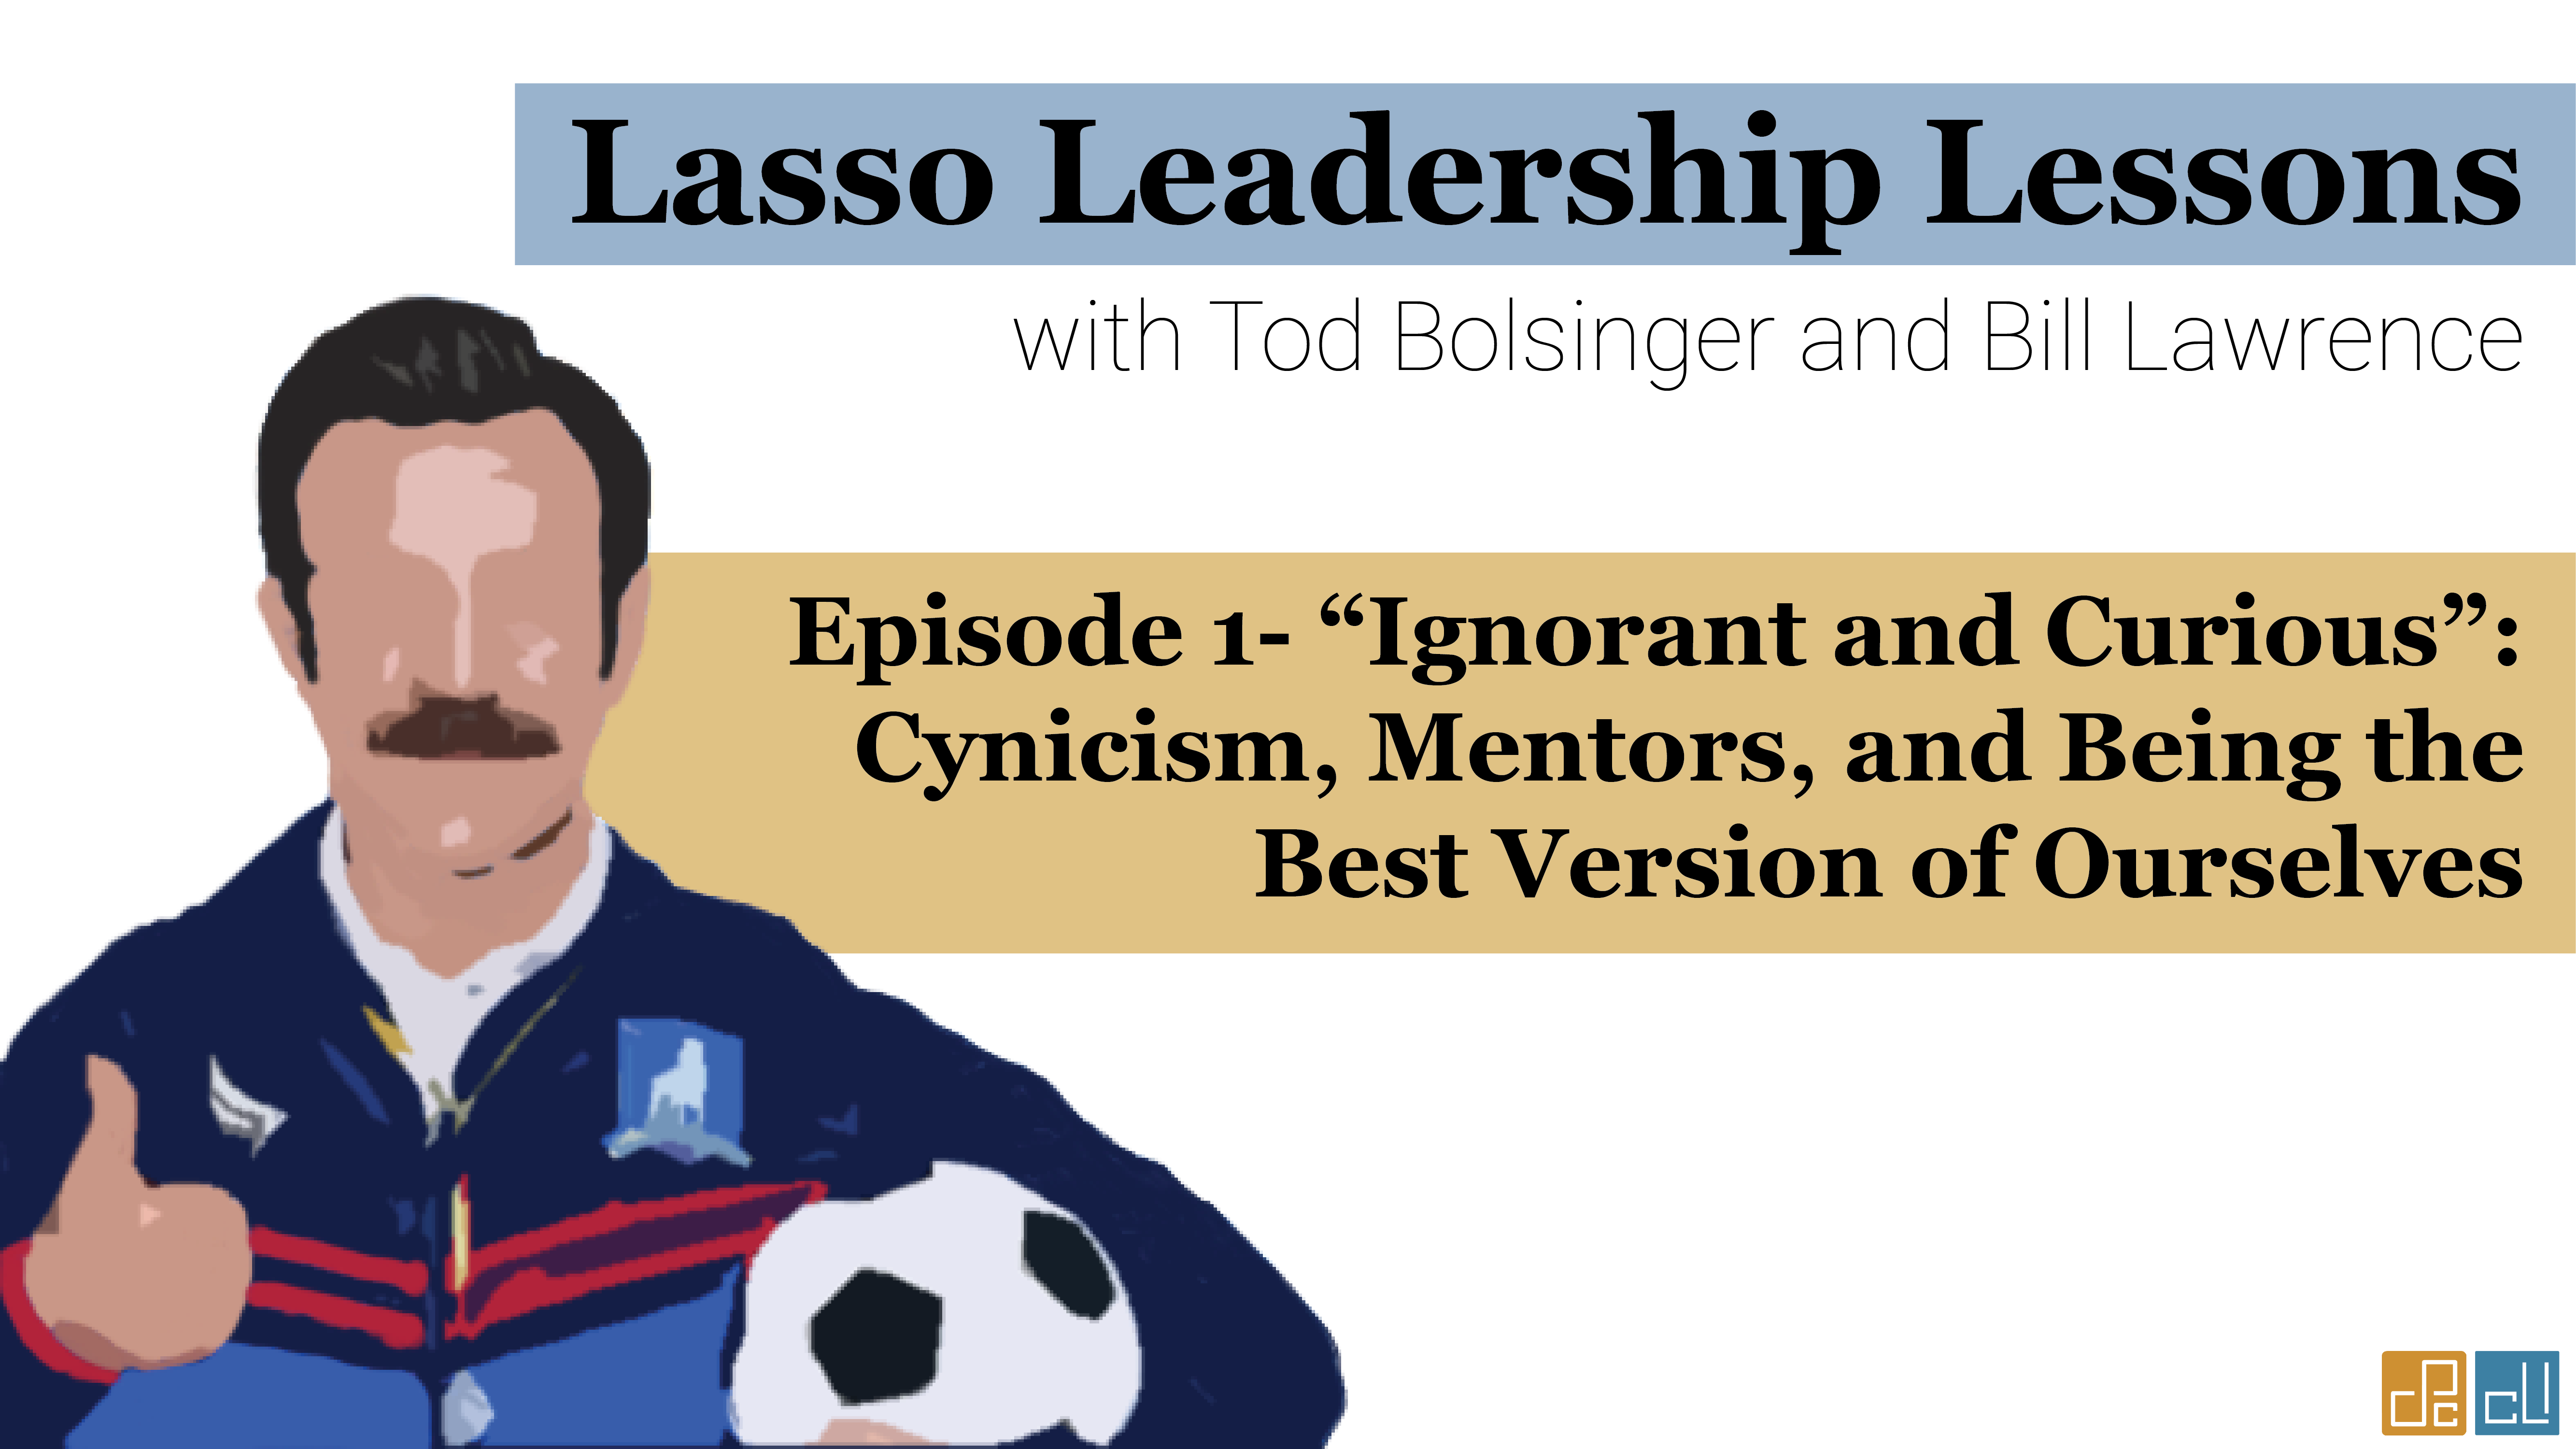 Why Ted Lasso Is the Ultimate Leader